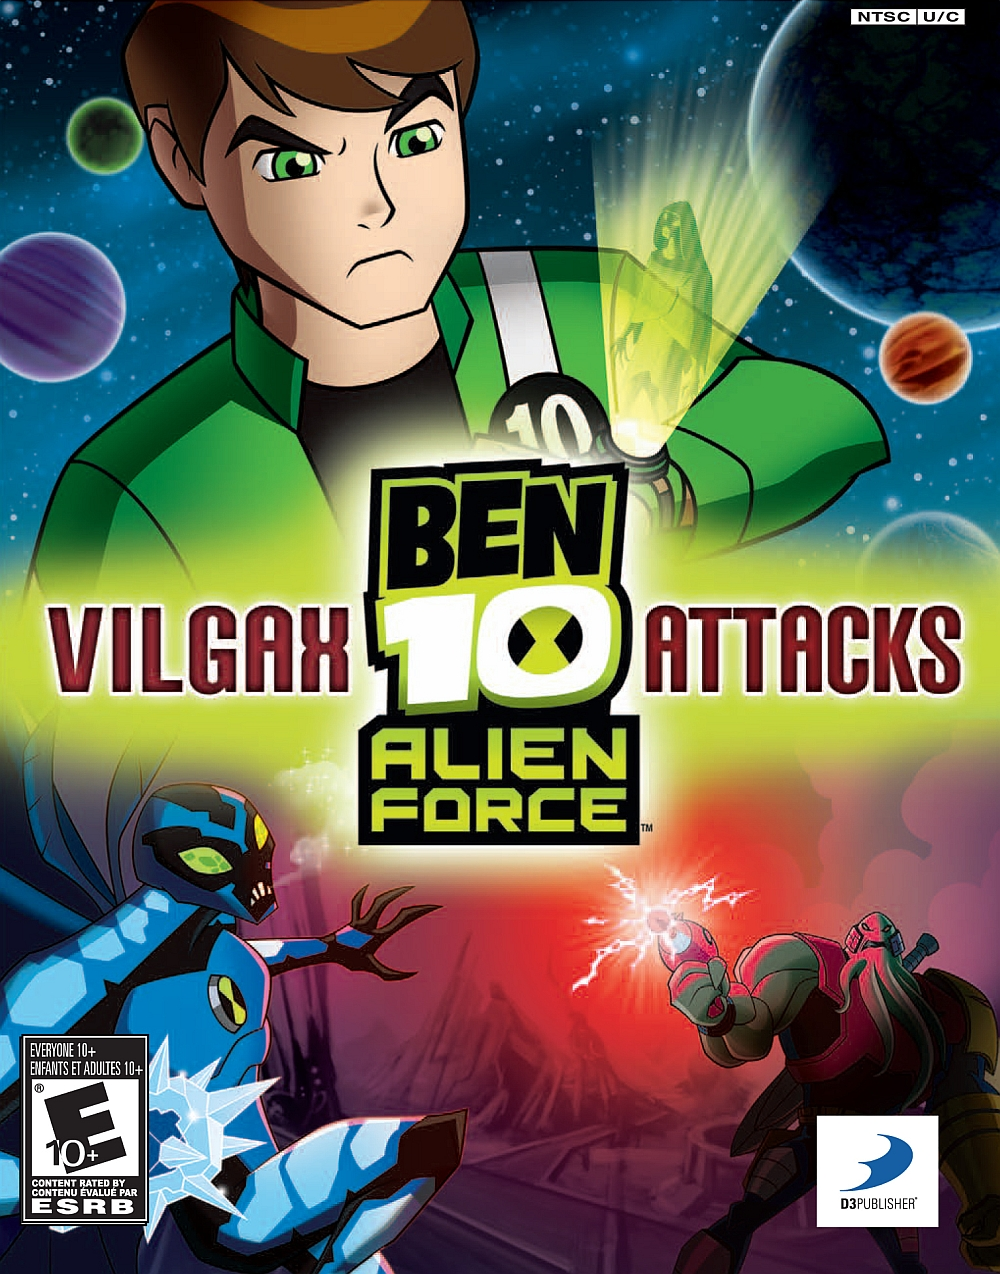 ben 10 protector of earth ds vilgax